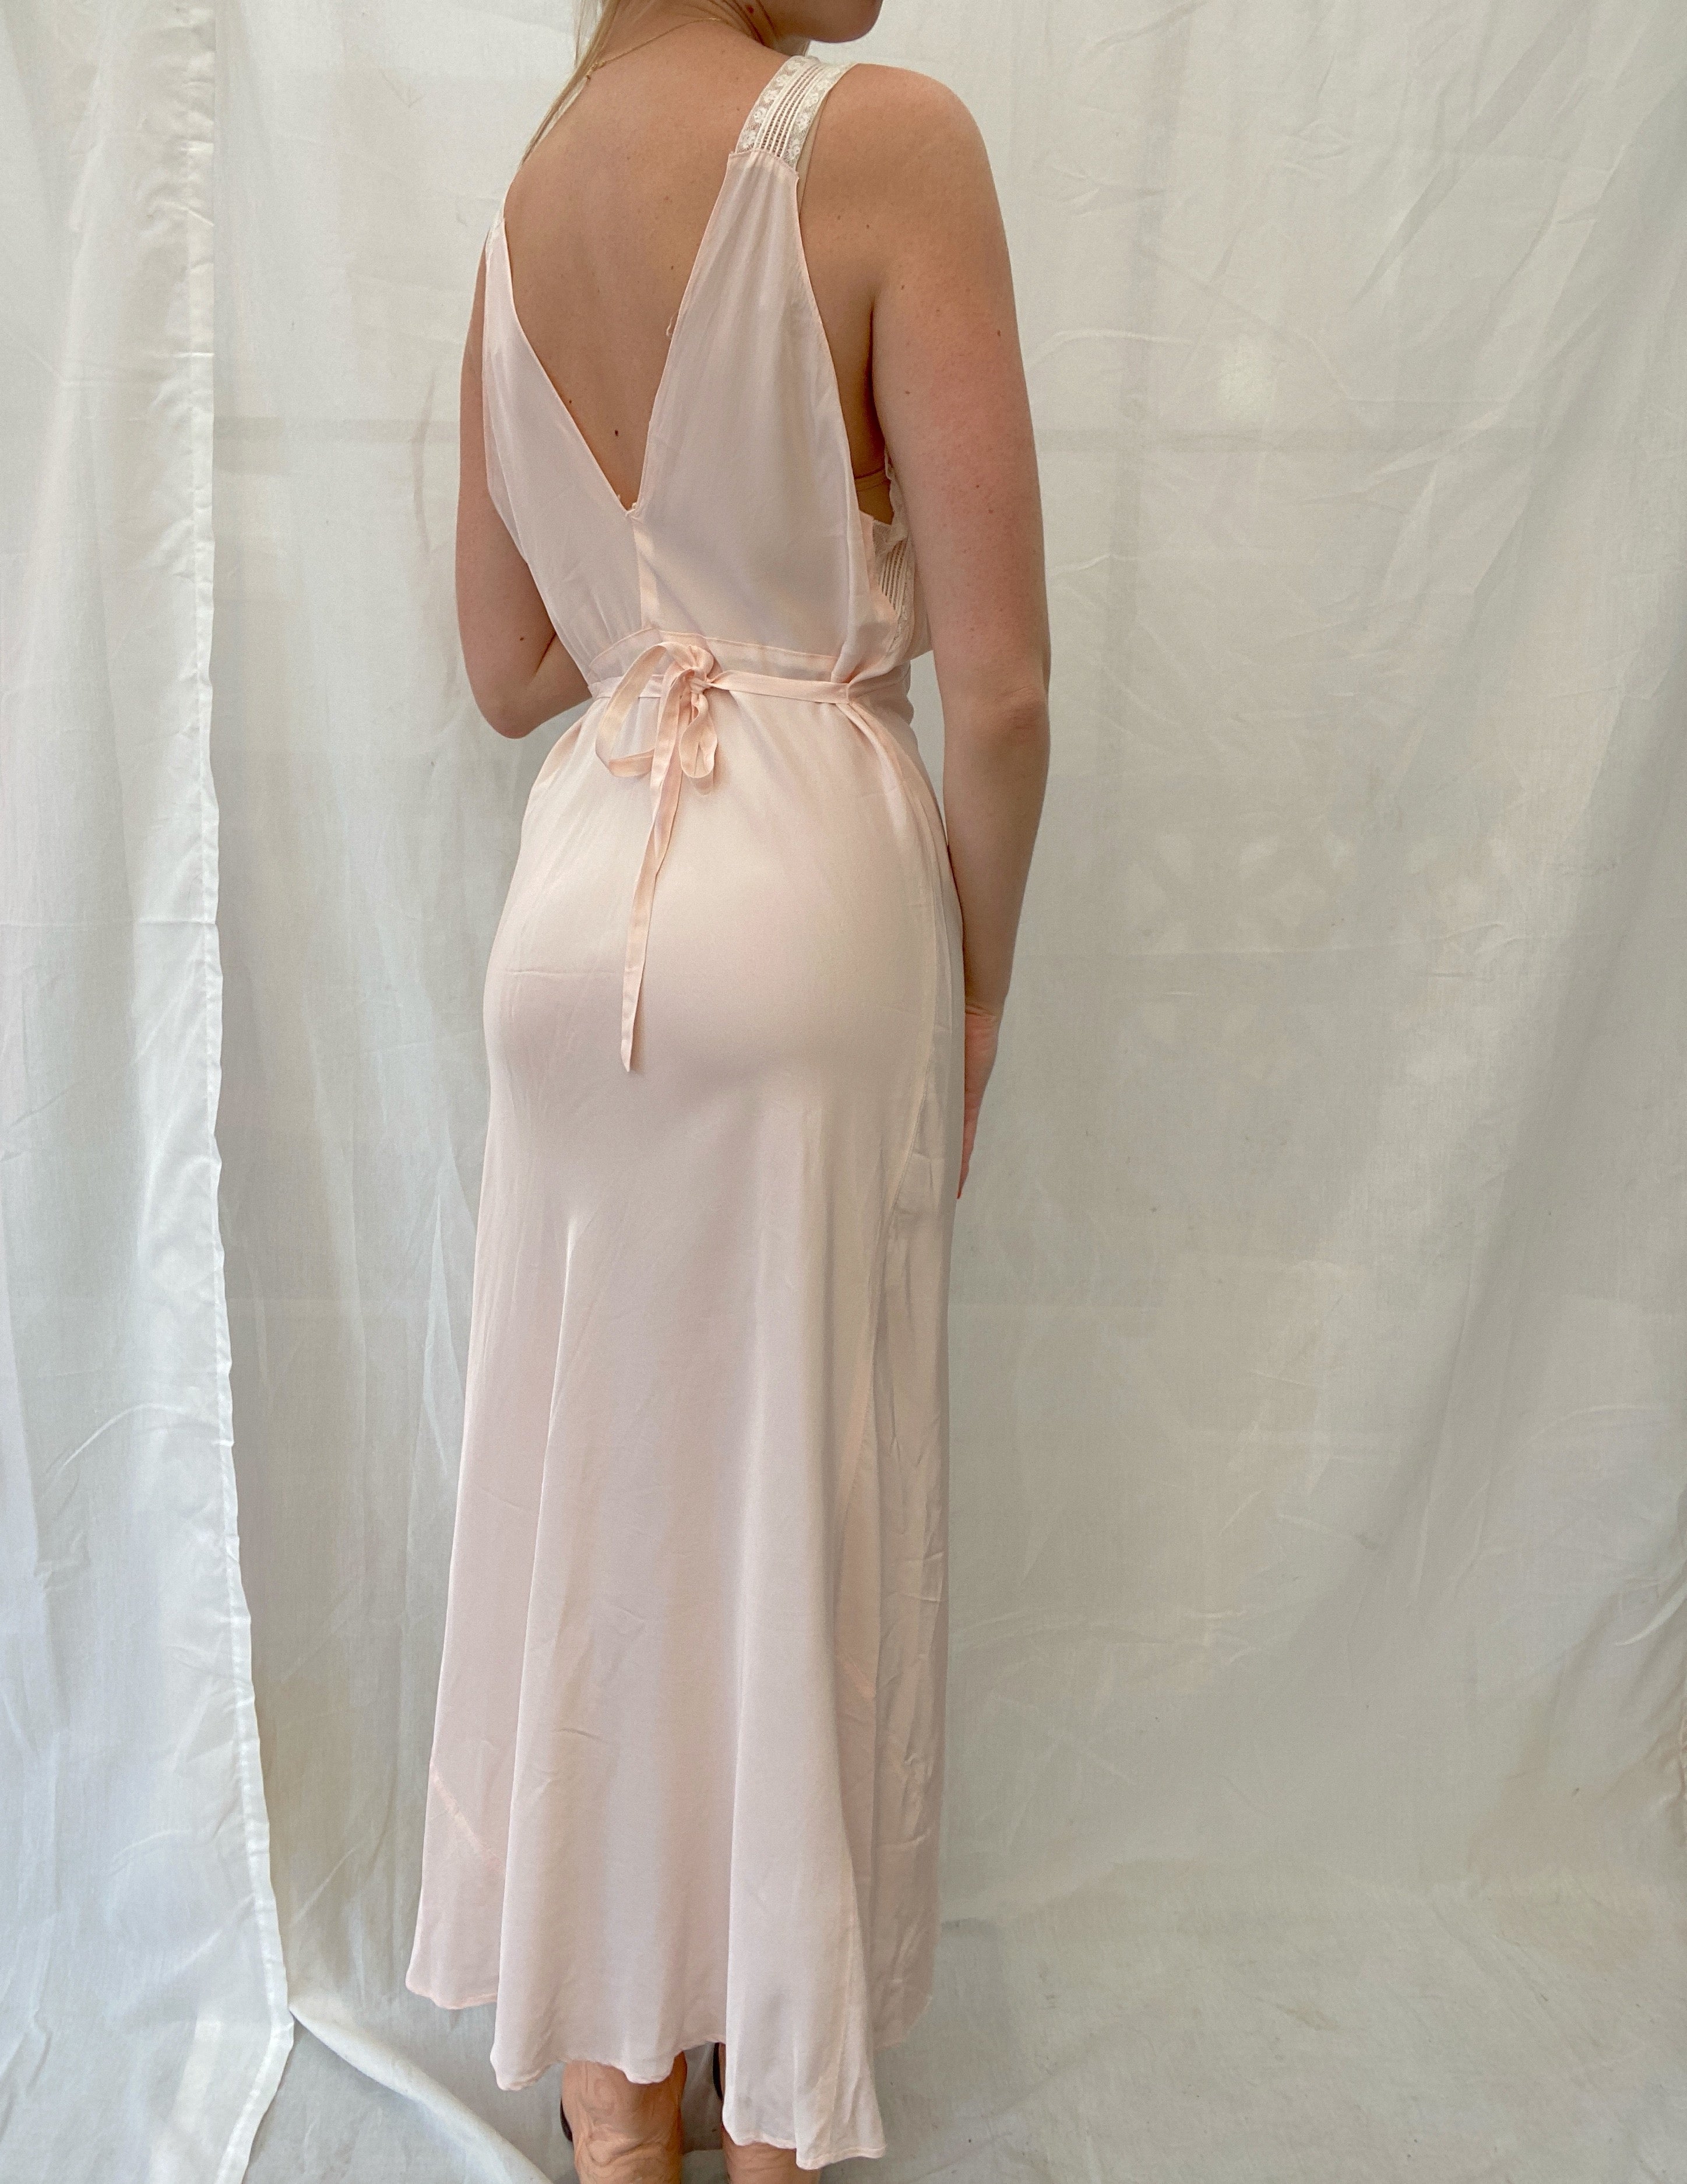 1940's Blush Pink Slip with White Lace